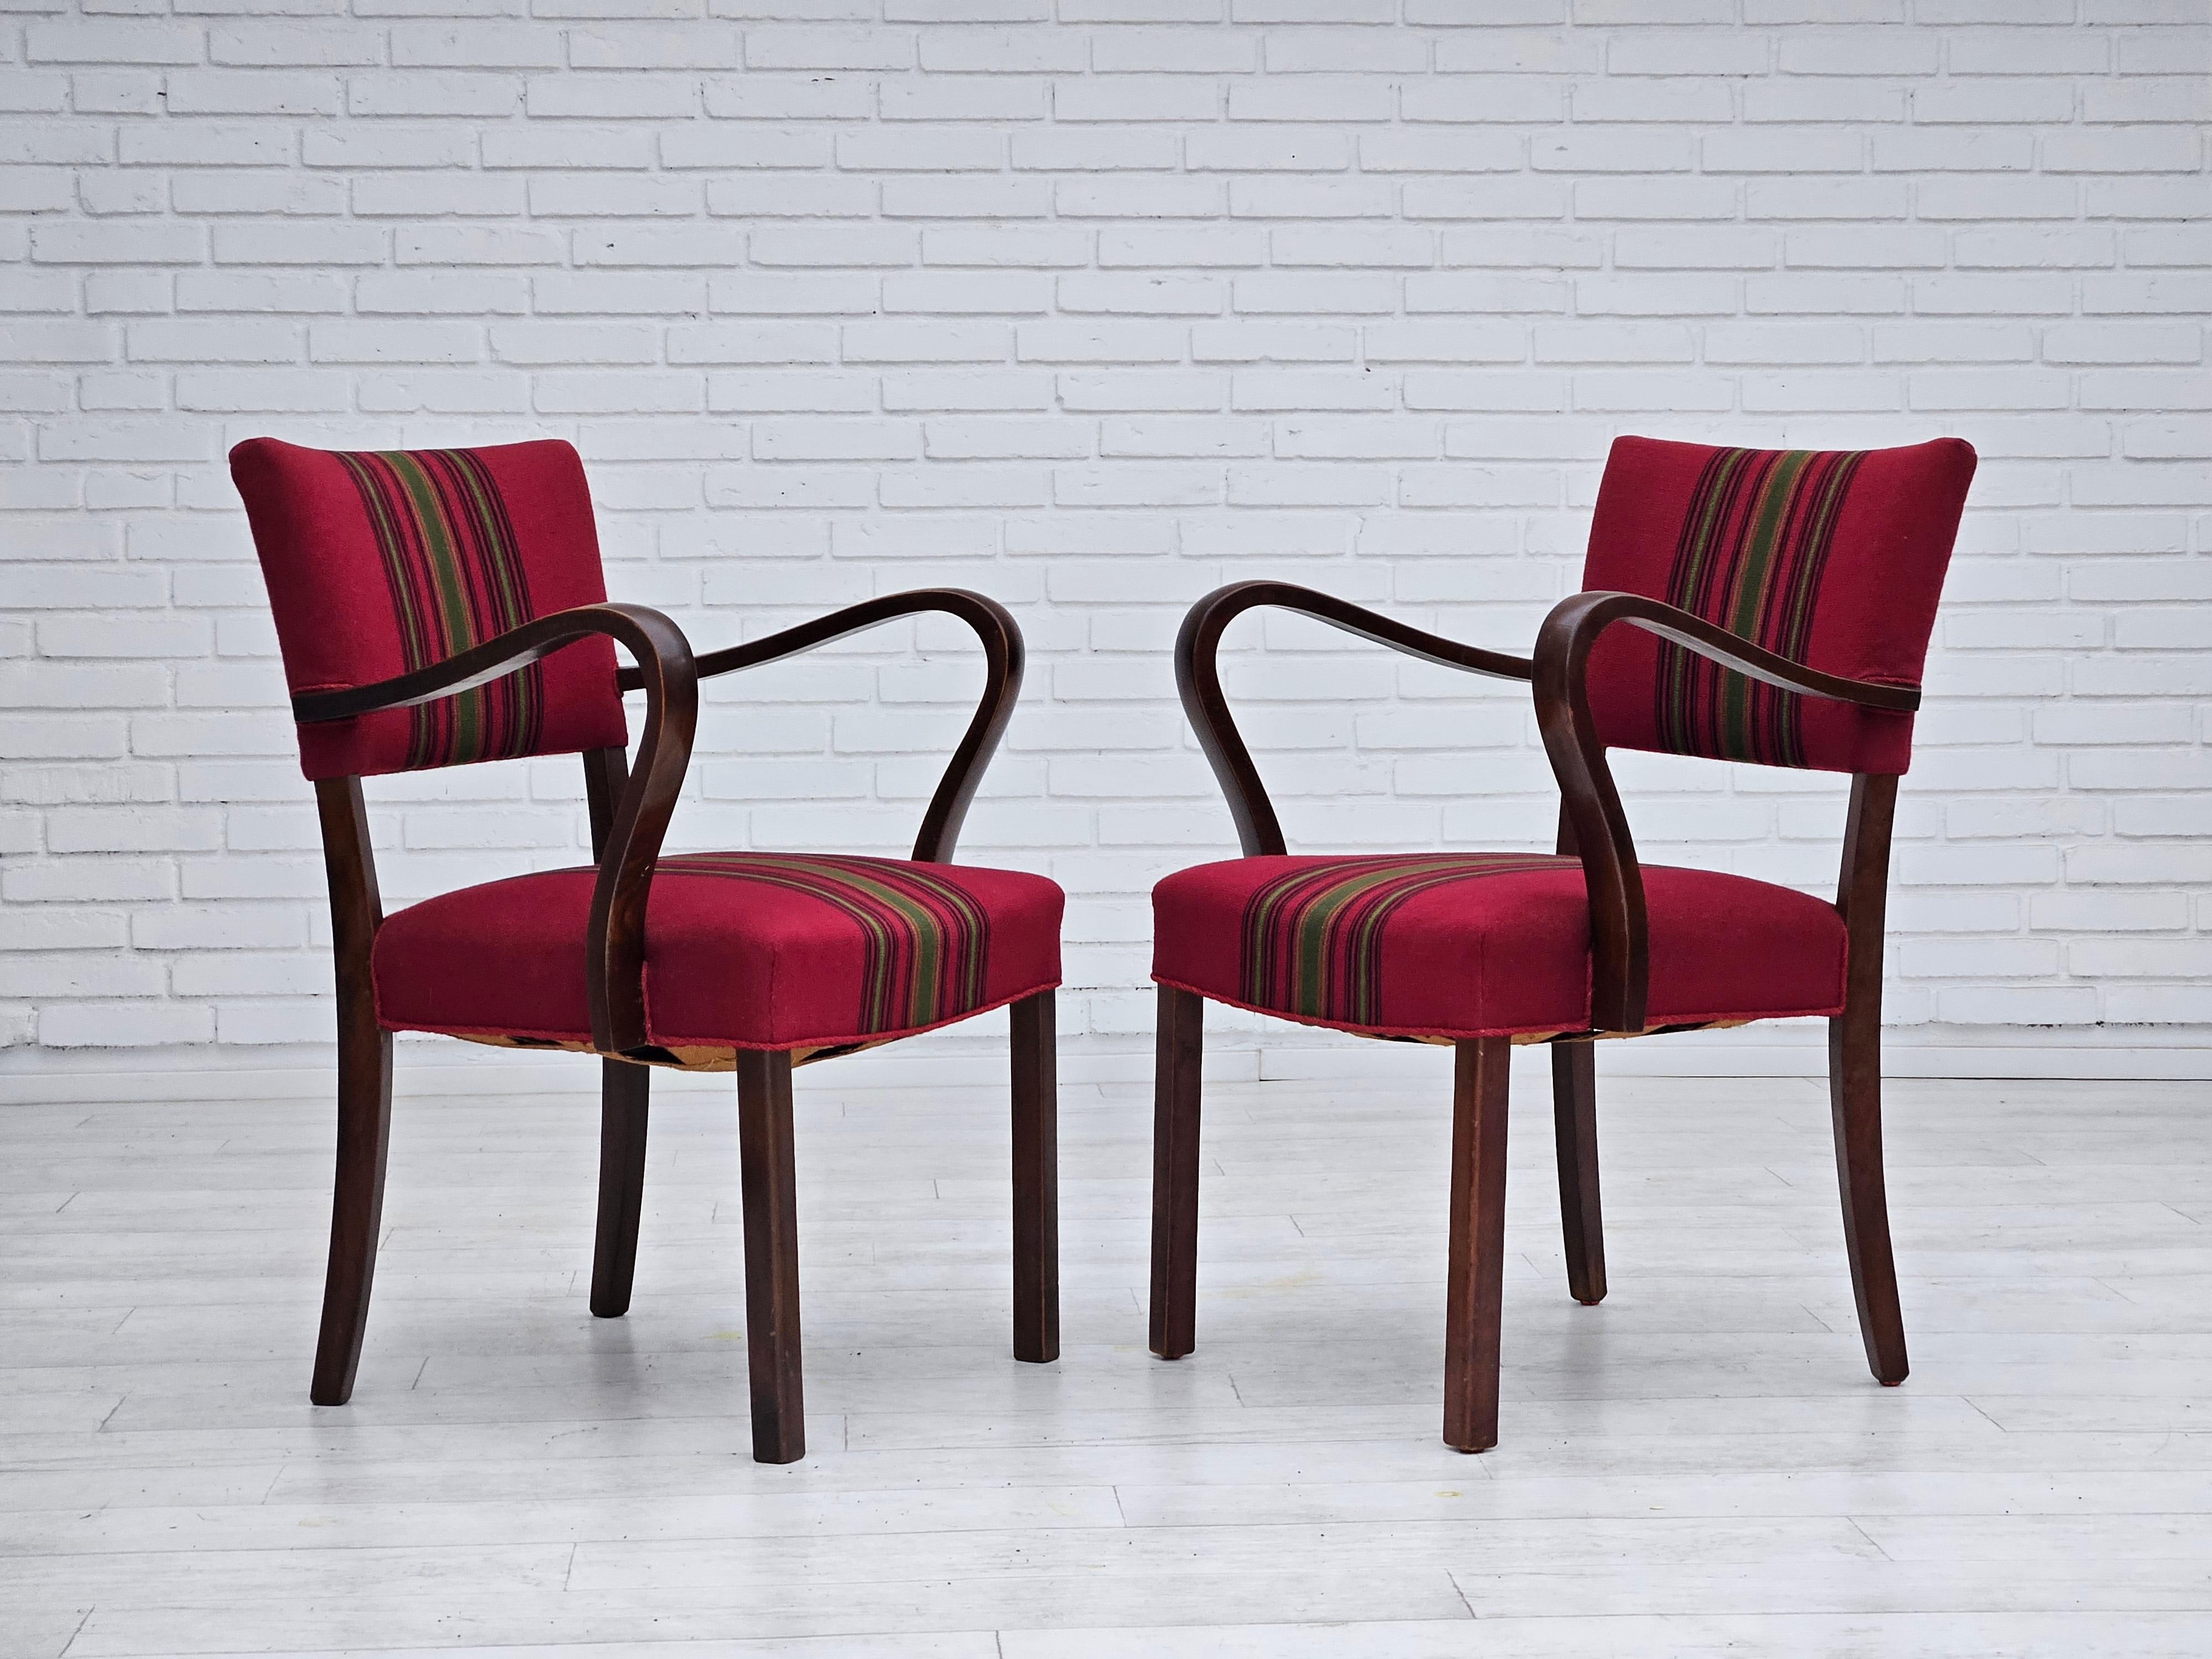 1950s, a pair of Danish armchairs. Original very good condition: no smells and no stains. Ash wood, furniture wool fabric, brass springs in the seat. Manufactured by Danish furniture manufacturer in about 1955s.